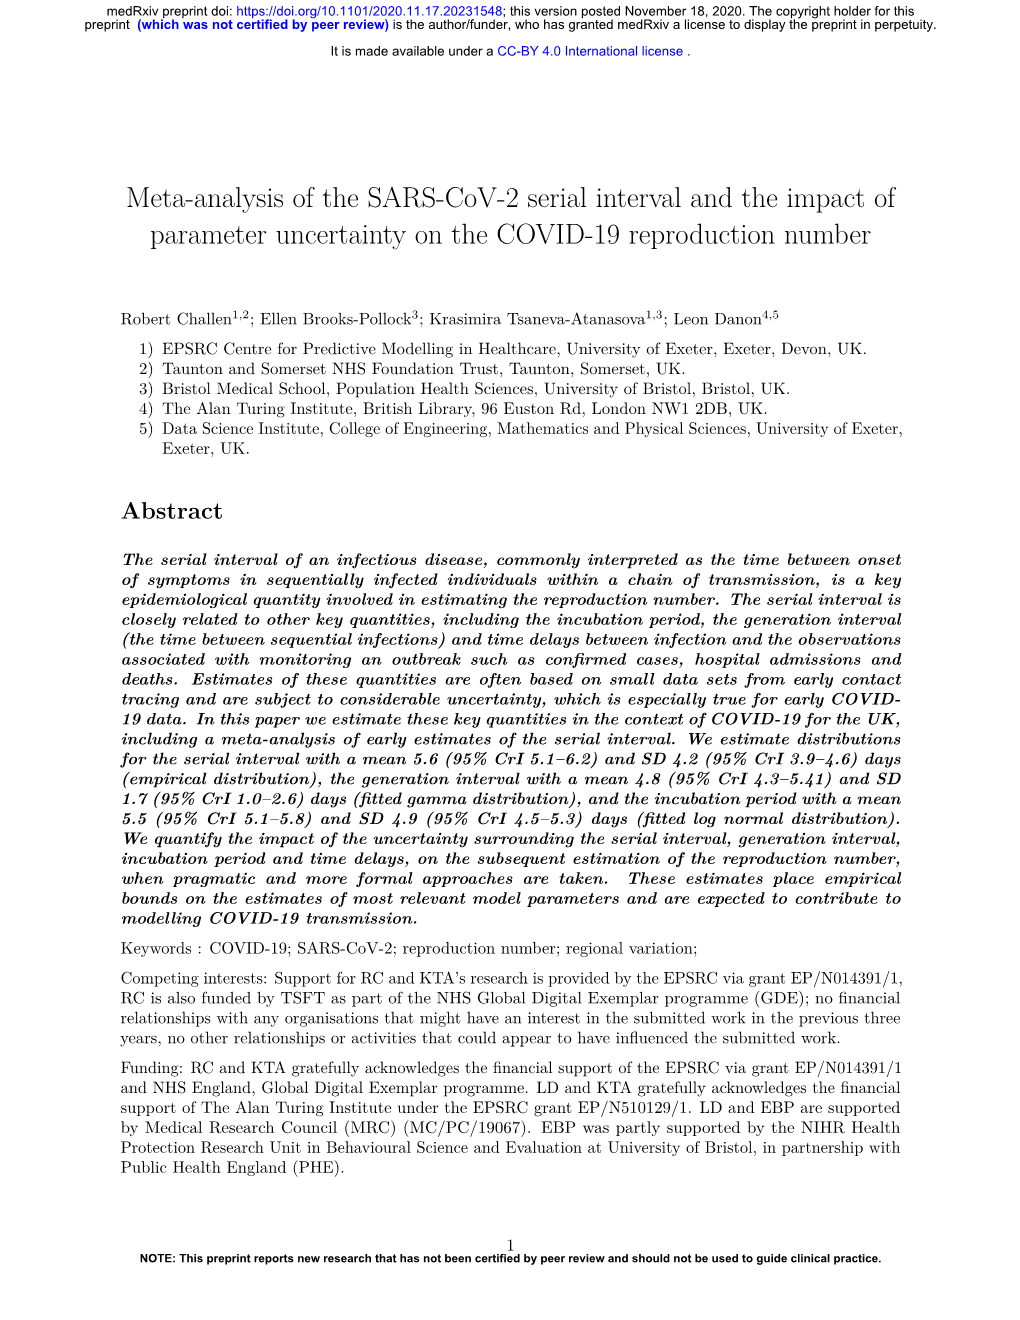 Meta-Analysis of the SARS-Cov-2 Serial Interval and the Impact of Parameter Uncertainty on the COVID-19 Reproduction Number